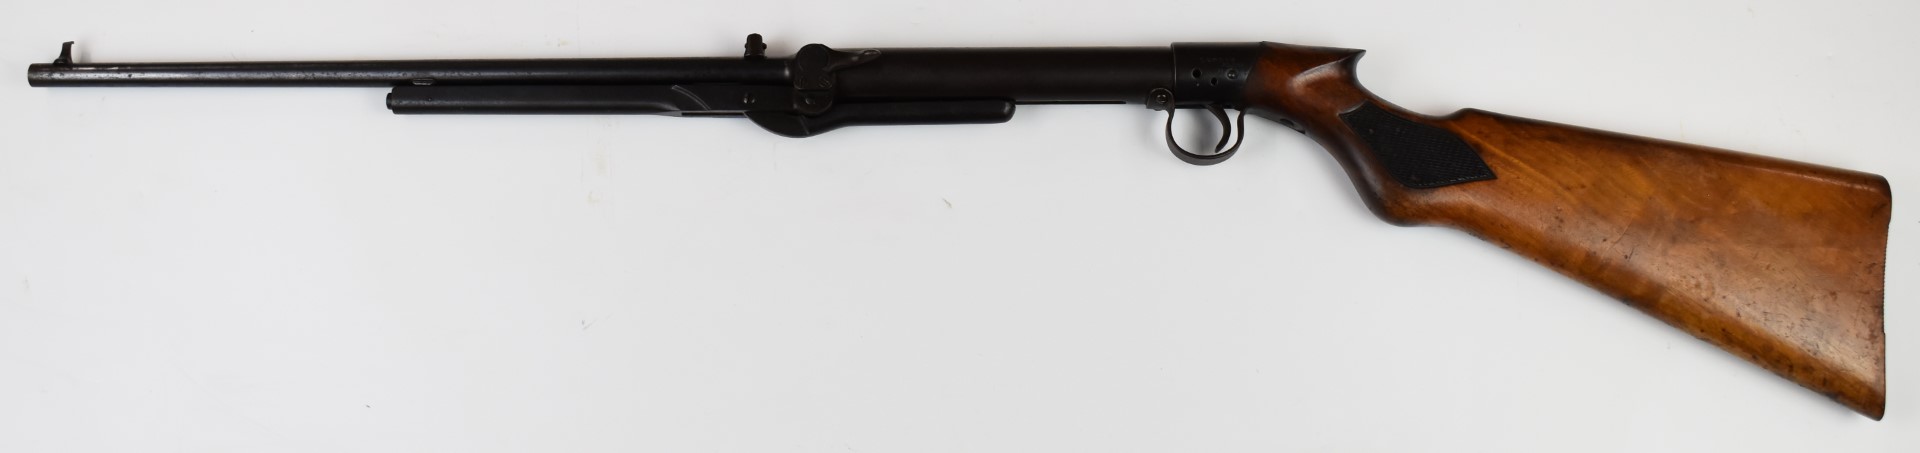 BSA Standard No 1 Light or Ladies .177 under-lever air rifle with chequered semi-pistol grip and - Image 7 of 7